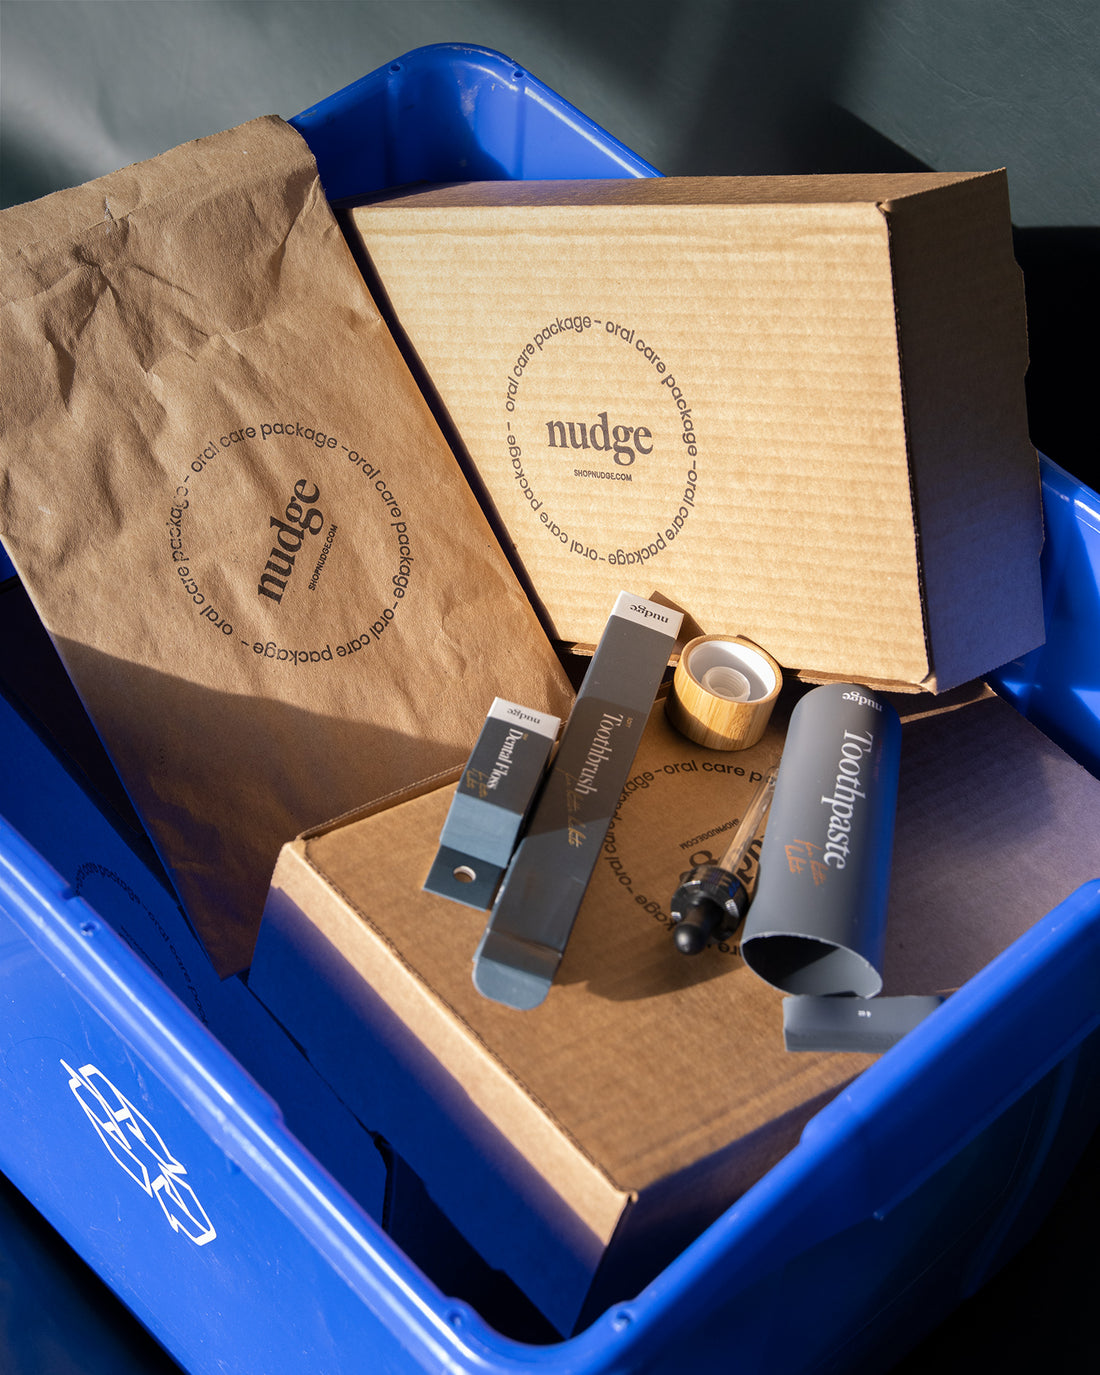 Recyclable boxes with oral care products